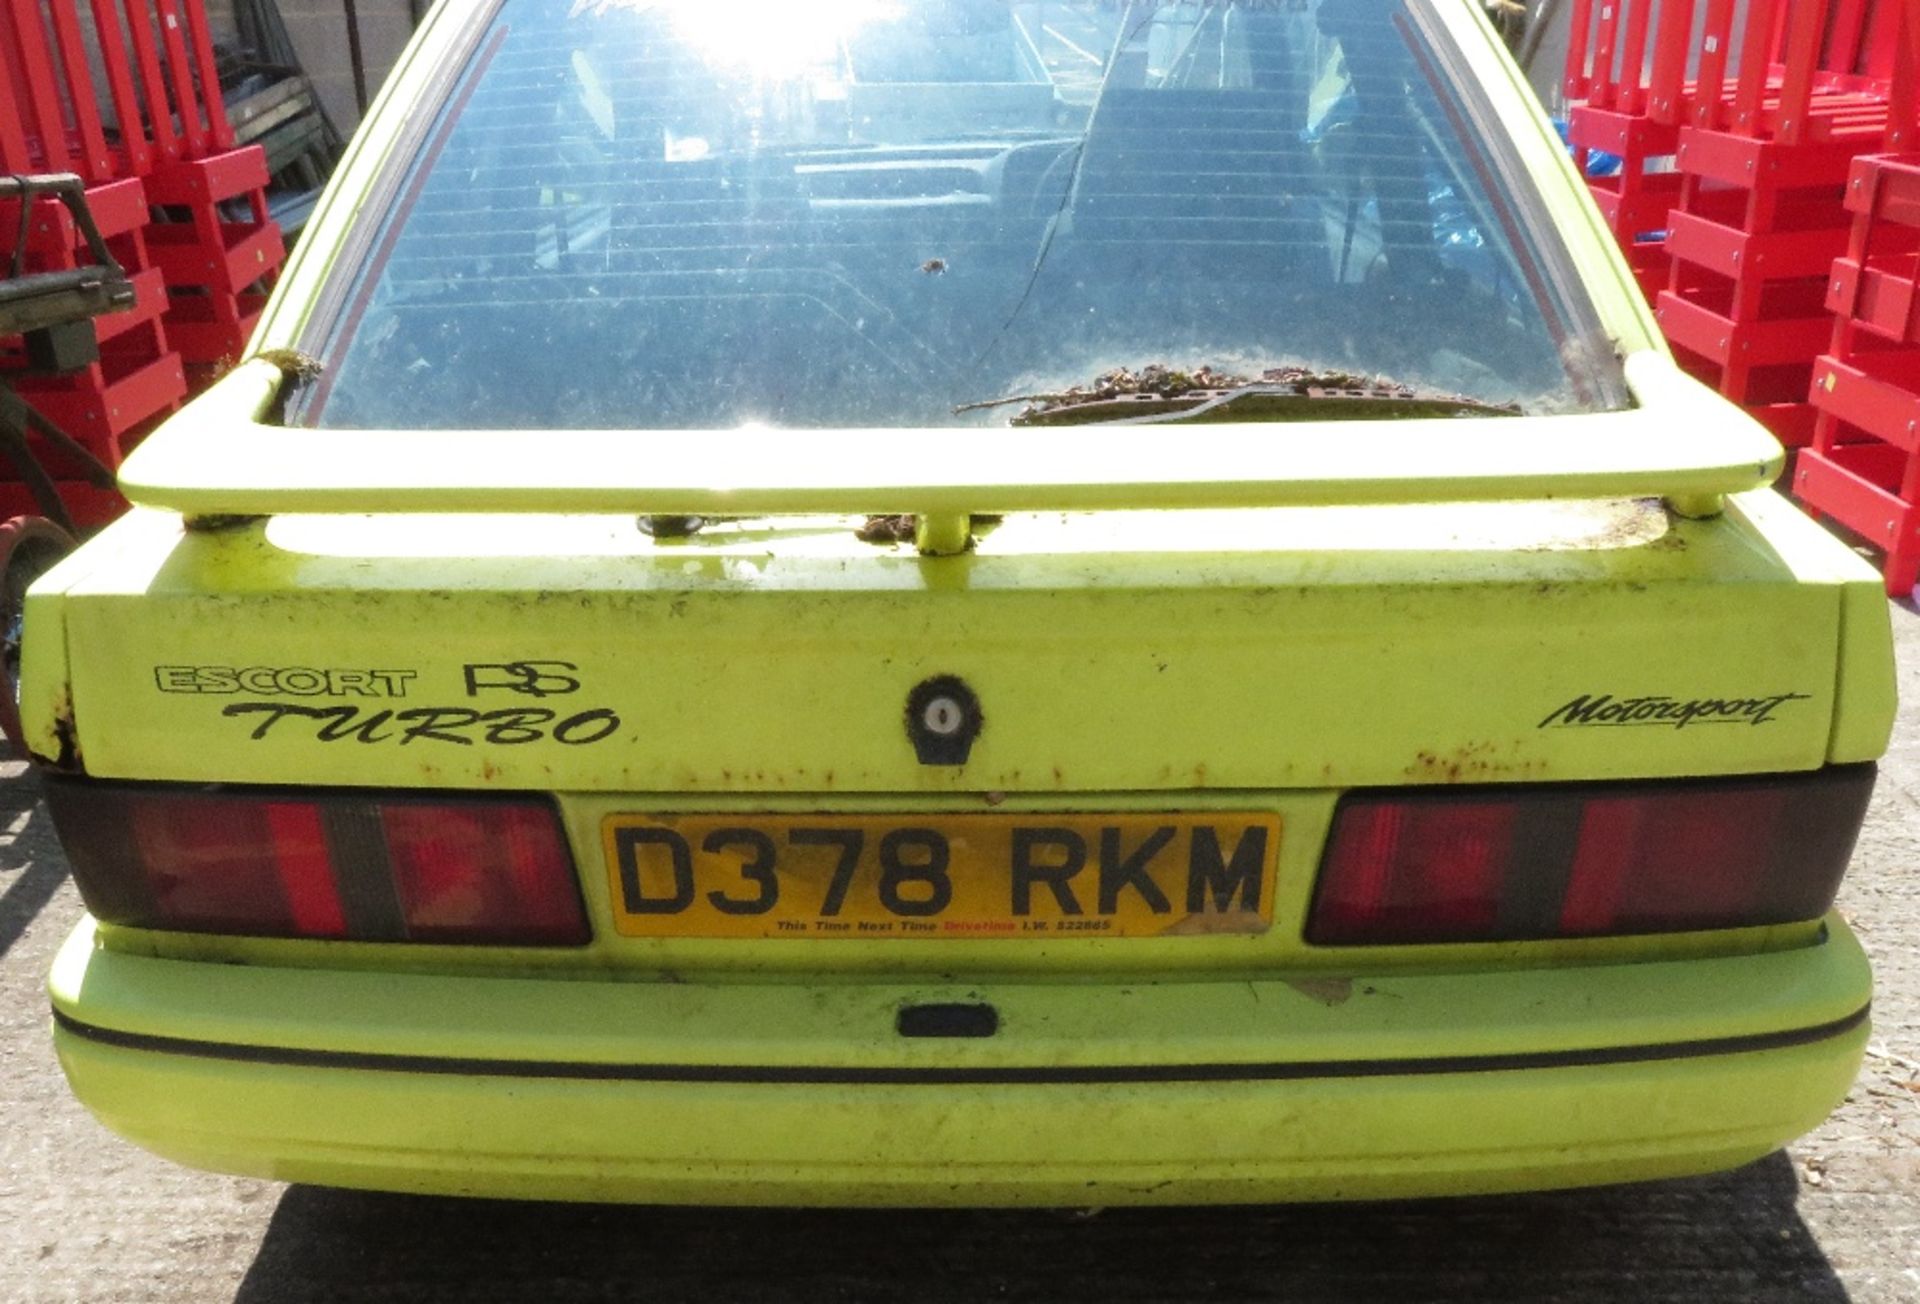 Ford RS Turbo, 2 door Reg no D378 RKM, we have keys & V5, the vehicle appears to be original with - Image 4 of 12